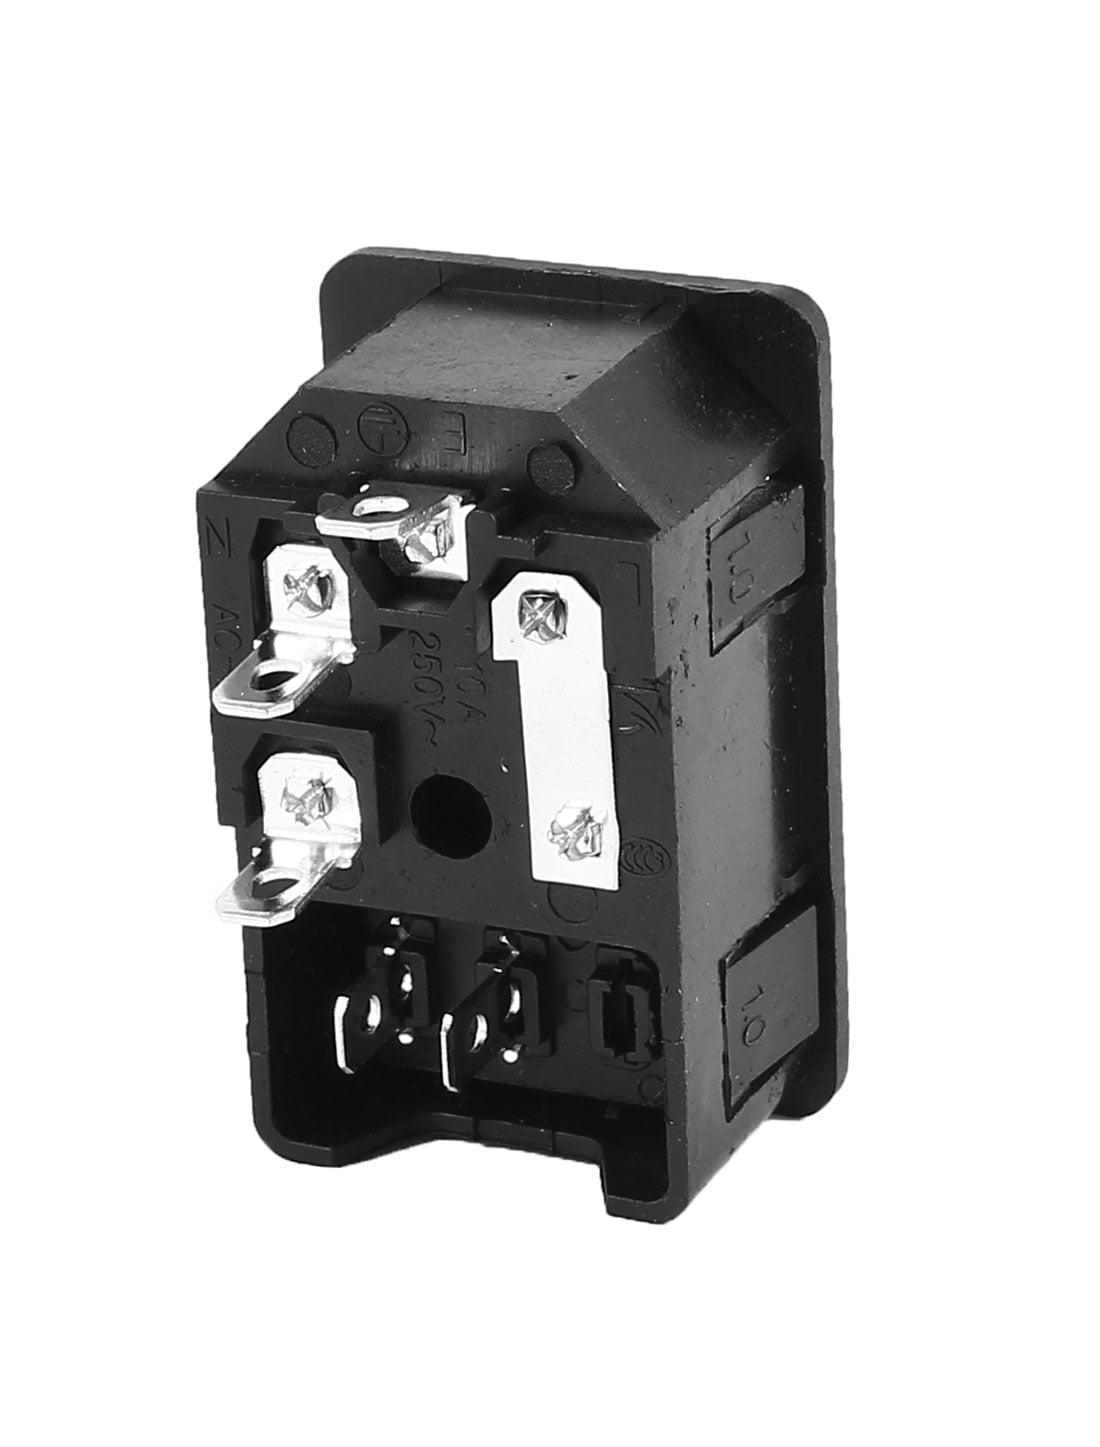 Red Light Rocker Switch Fuse Inlet Male Power Supply Connector Plug IEC 320 C14 